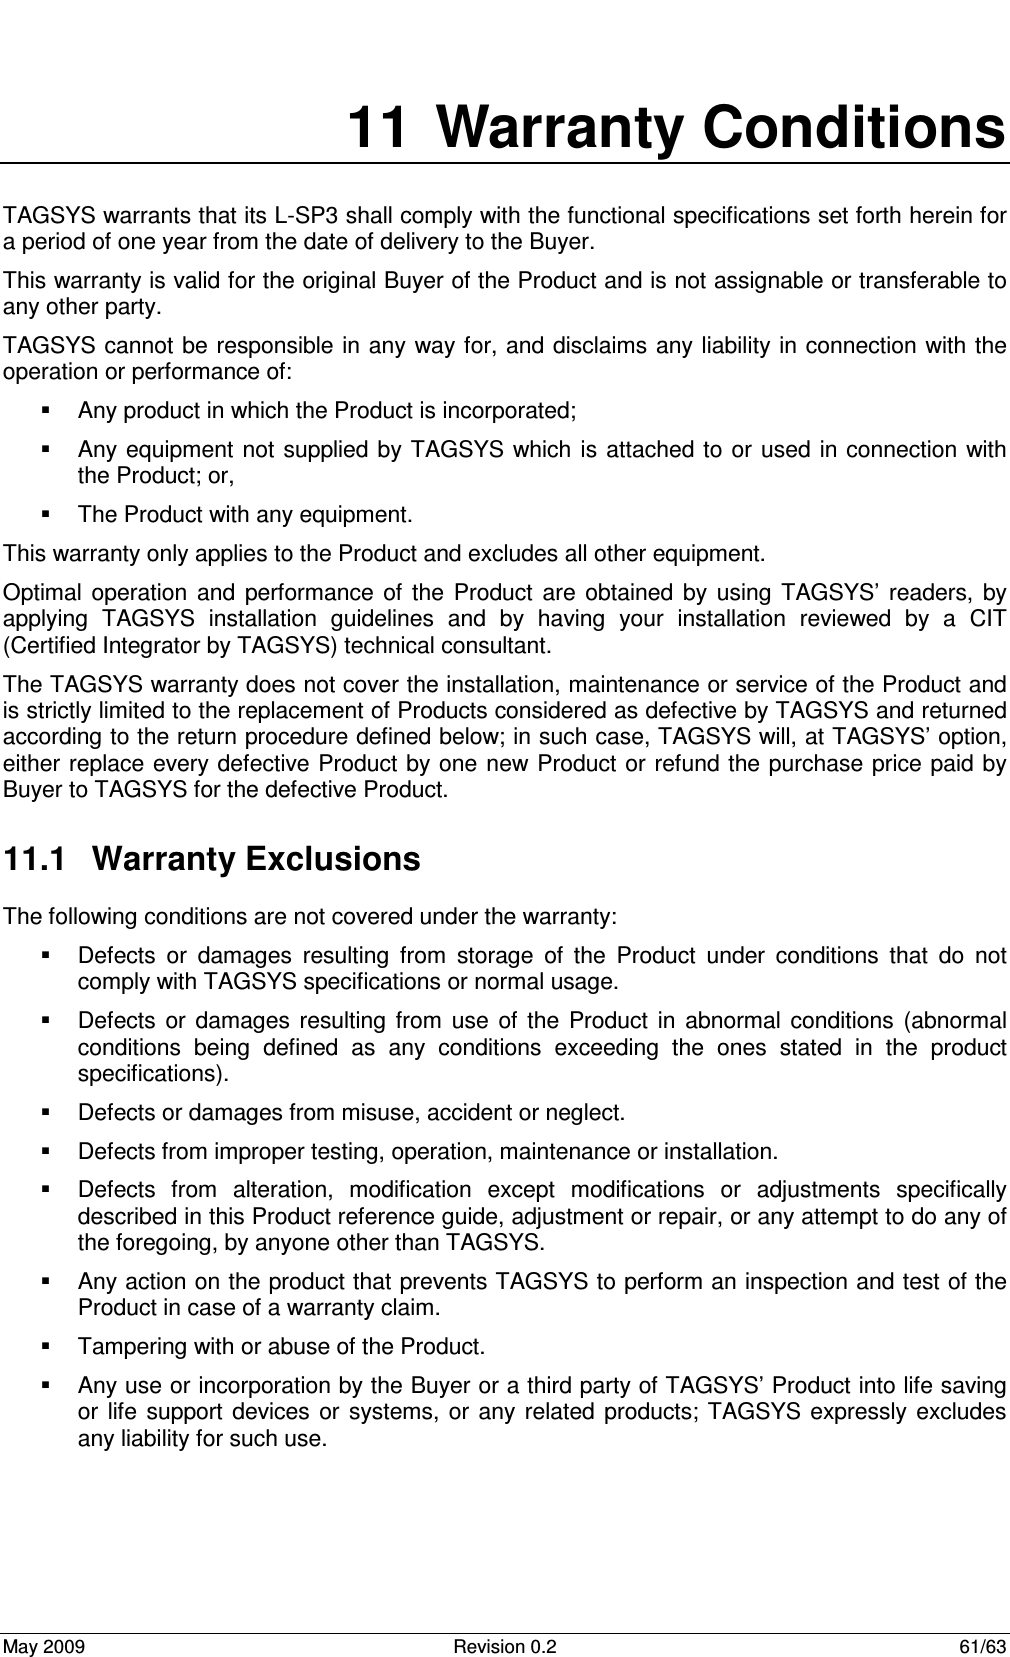  May 2009  Revision 0.2  61/63 11  Warranty Conditions TAGSYS warrants that its L-SP3 shall comply with the functional specifications set forth herein for a period of one year from the date of delivery to the Buyer. This warranty is valid for the original Buyer of the Product and is not assignable or transferable to any other party. TAGSYS cannot  be responsible in any  way for, and disclaims any liability in connection with the operation or performance of:   Any product in which the Product is incorporated;   Any equipment  not supplied by TAGSYS  which  is attached to or  used in connection with the Product; or,   The Product with any equipment. This warranty only applies to the Product and excludes all other equipment. Optimal  operation  and  performance  of  the  Product  are  obtained  by  using  TAGSYS’  readers,  by applying  TAGSYS  installation  guidelines  and  by  having  your  installation  reviewed  by  a  CIT (Certified Integrator by TAGSYS) technical consultant. The TAGSYS warranty does not cover the installation, maintenance or service of the Product and is strictly limited to the replacement of Products considered as defective by TAGSYS and returned according to the return procedure defined below; in such case, TAGSYS will, at TAGSYS’ option, either replace every defective Product by one new Product or refund the purchase price paid by Buyer to TAGSYS for the defective Product. 11.1  Warranty Exclusions  The following conditions are not covered under the warranty:   Defects  or  damages  resulting  from  storage  of  the  Product  under  conditions  that  do  not comply with TAGSYS specifications or normal usage.   Defects  or  damages  resulting  from  use  of  the  Product  in  abnormal  conditions  (abnormal conditions  being  defined  as  any  conditions  exceeding  the  ones  stated  in  the  product specifications).   Defects or damages from misuse, accident or neglect.   Defects from improper testing, operation, maintenance or installation.   Defects  from  alteration,  modification  except  modifications  or  adjustments  specifically described in this Product reference guide, adjustment or repair, or any attempt to do any of the foregoing, by anyone other than TAGSYS.   Any action on the product that prevents TAGSYS to perform an inspection and test of the Product in case of a warranty claim.   Tampering with or abuse of the Product.   Any use or incorporation by the Buyer or a third party of TAGSYS’ Product into life saving or  life  support  devices  or  systems,  or any  related  products; TAGSYS  expressly excludes any liability for such use. 